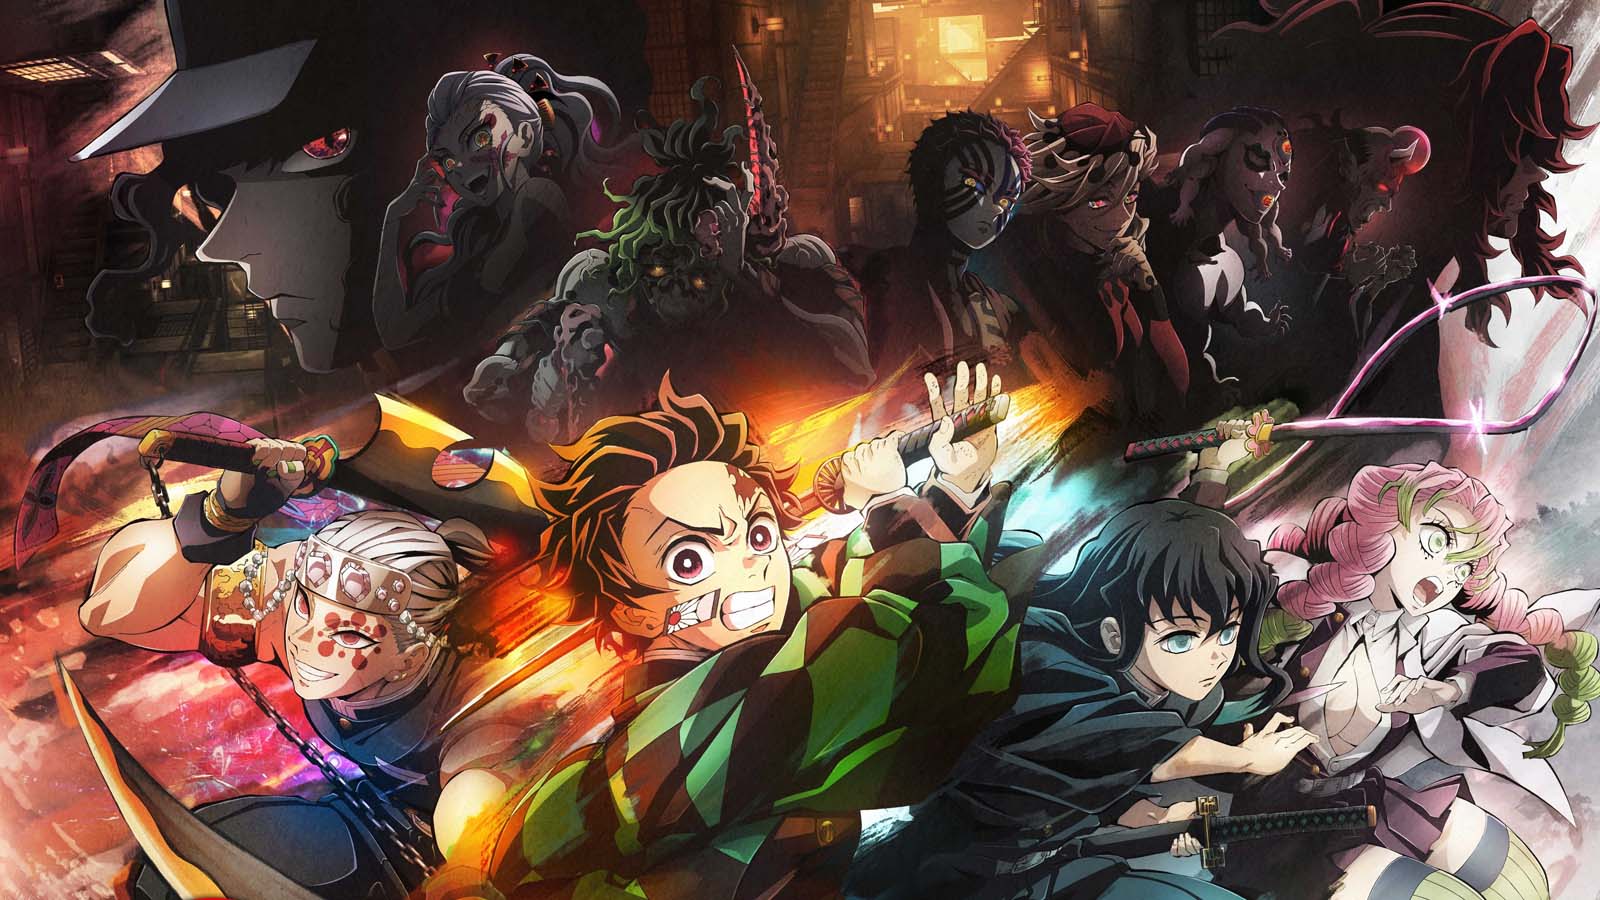 Demon Slayer watch order: How to watch the anime and movies in chronological order